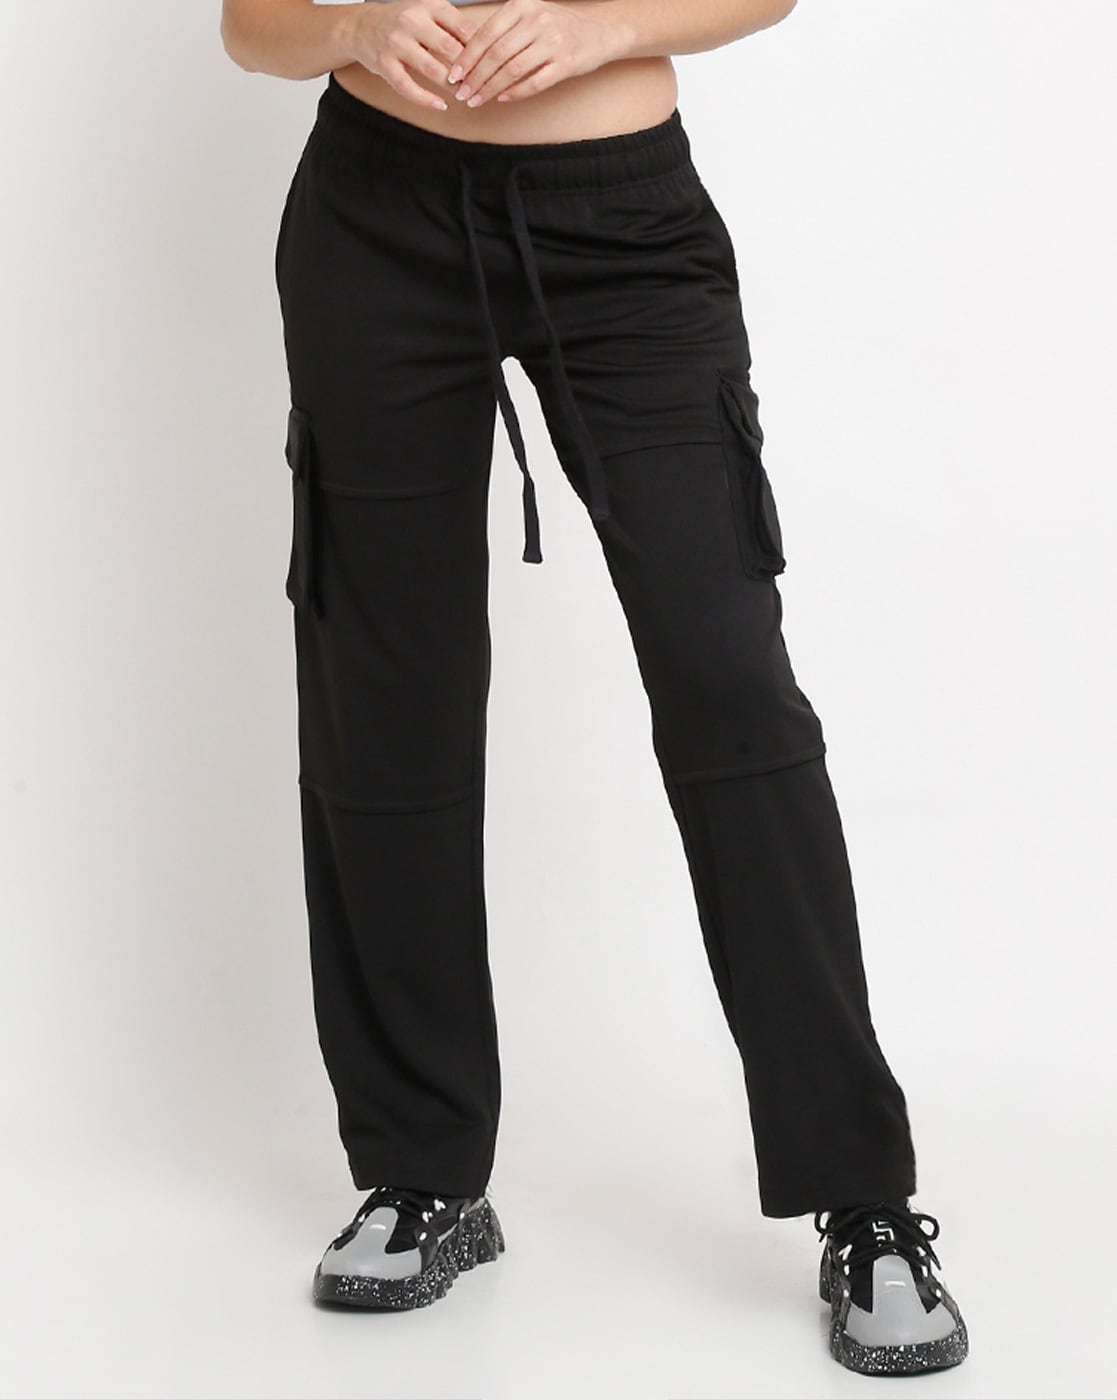 Byvheh Women's Cargo Pants Joggers Pants with Chain India | Ubuy